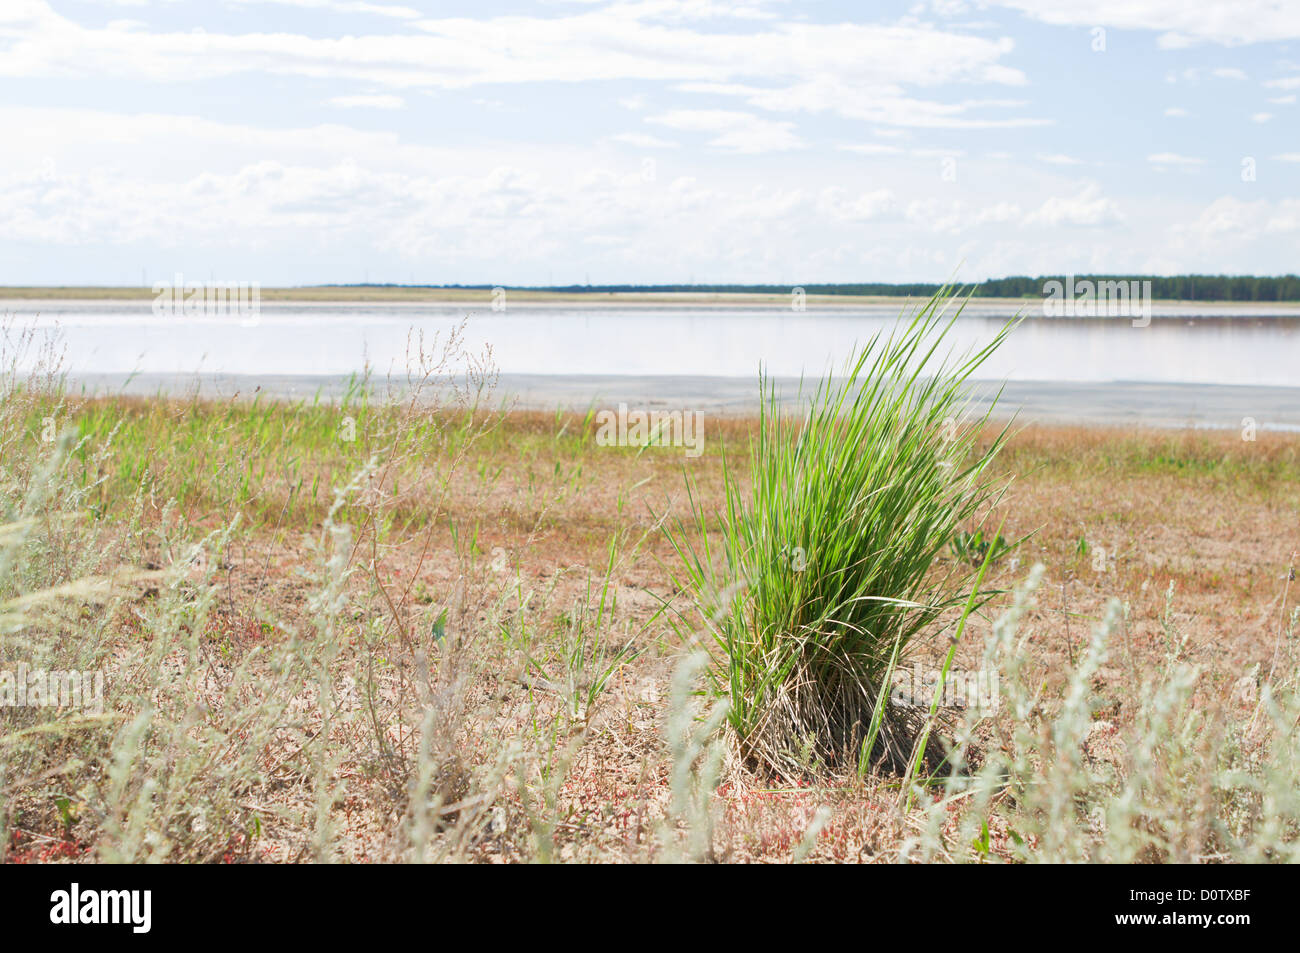 Poor vegetation on the dried up lake Stock Photo